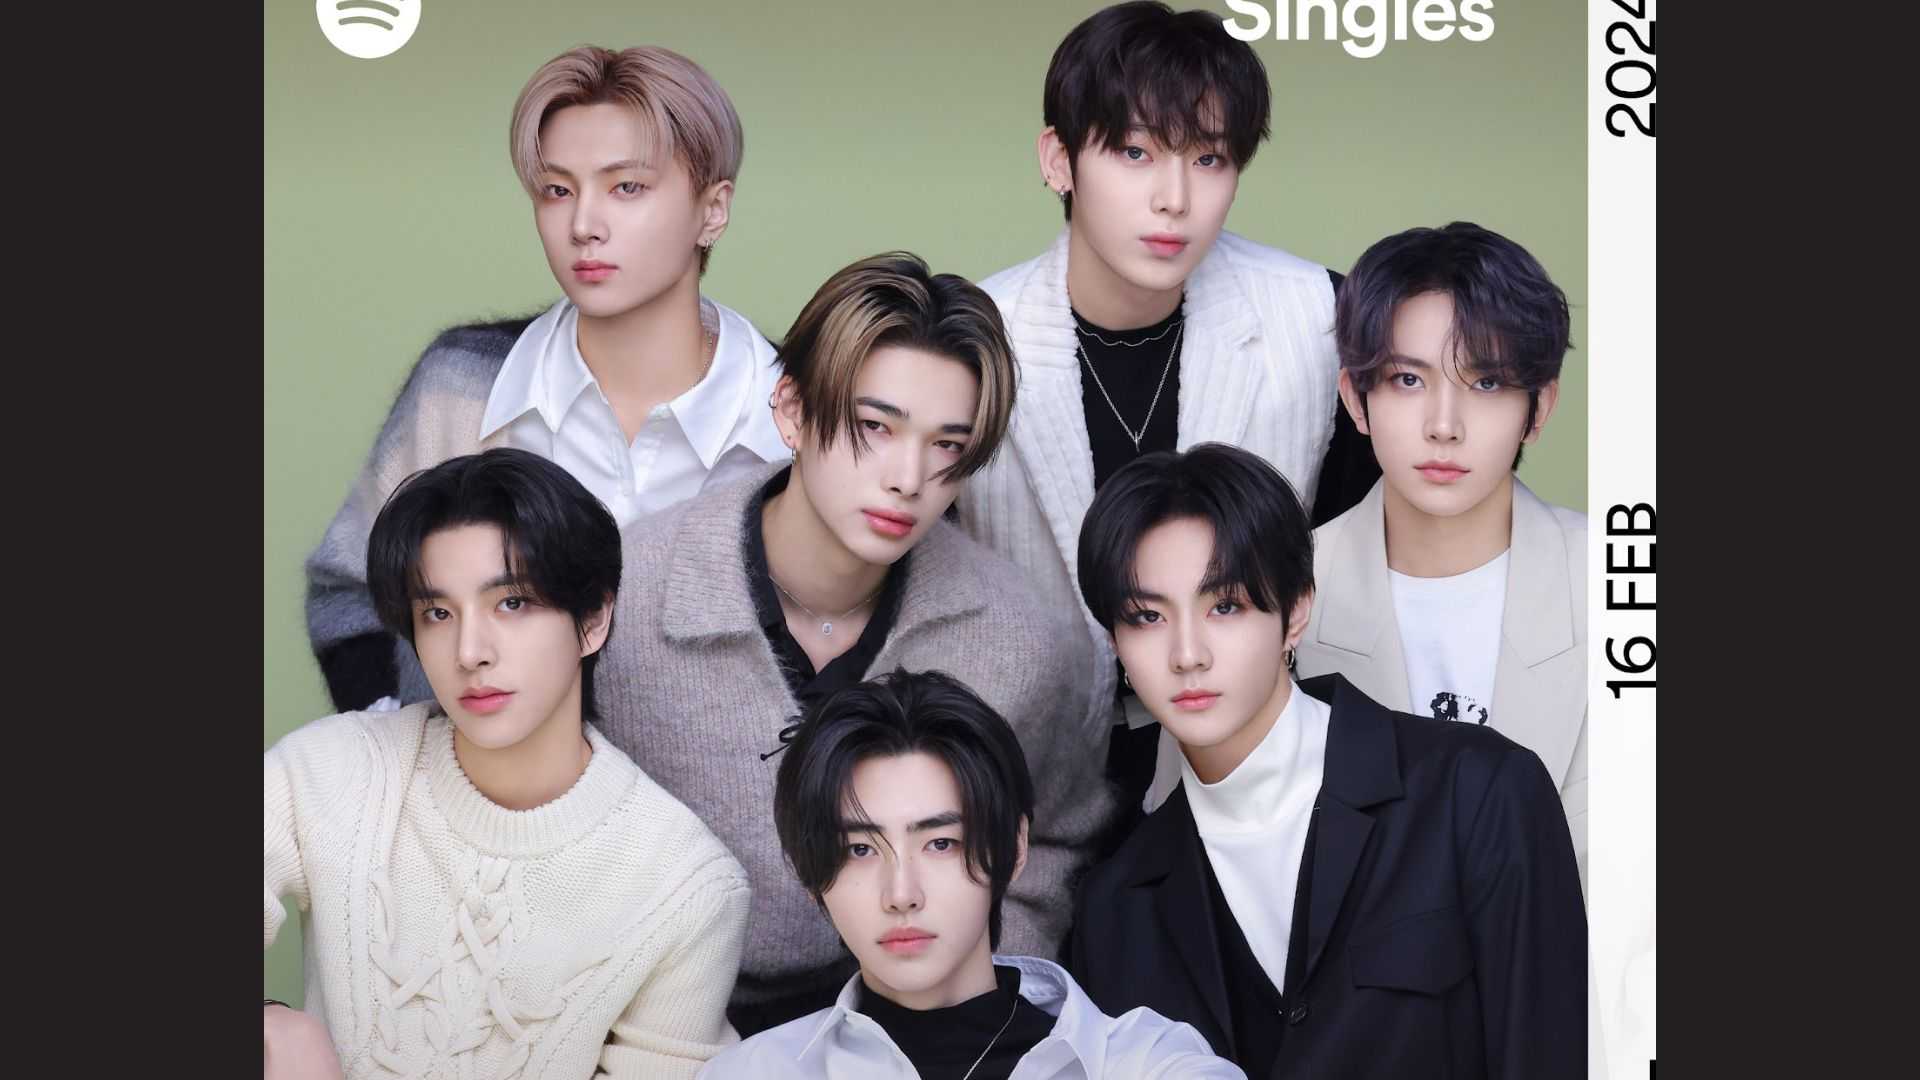 ENHYPEN releases remake of BTS' ‘I NEED U’ for Spotify Singles